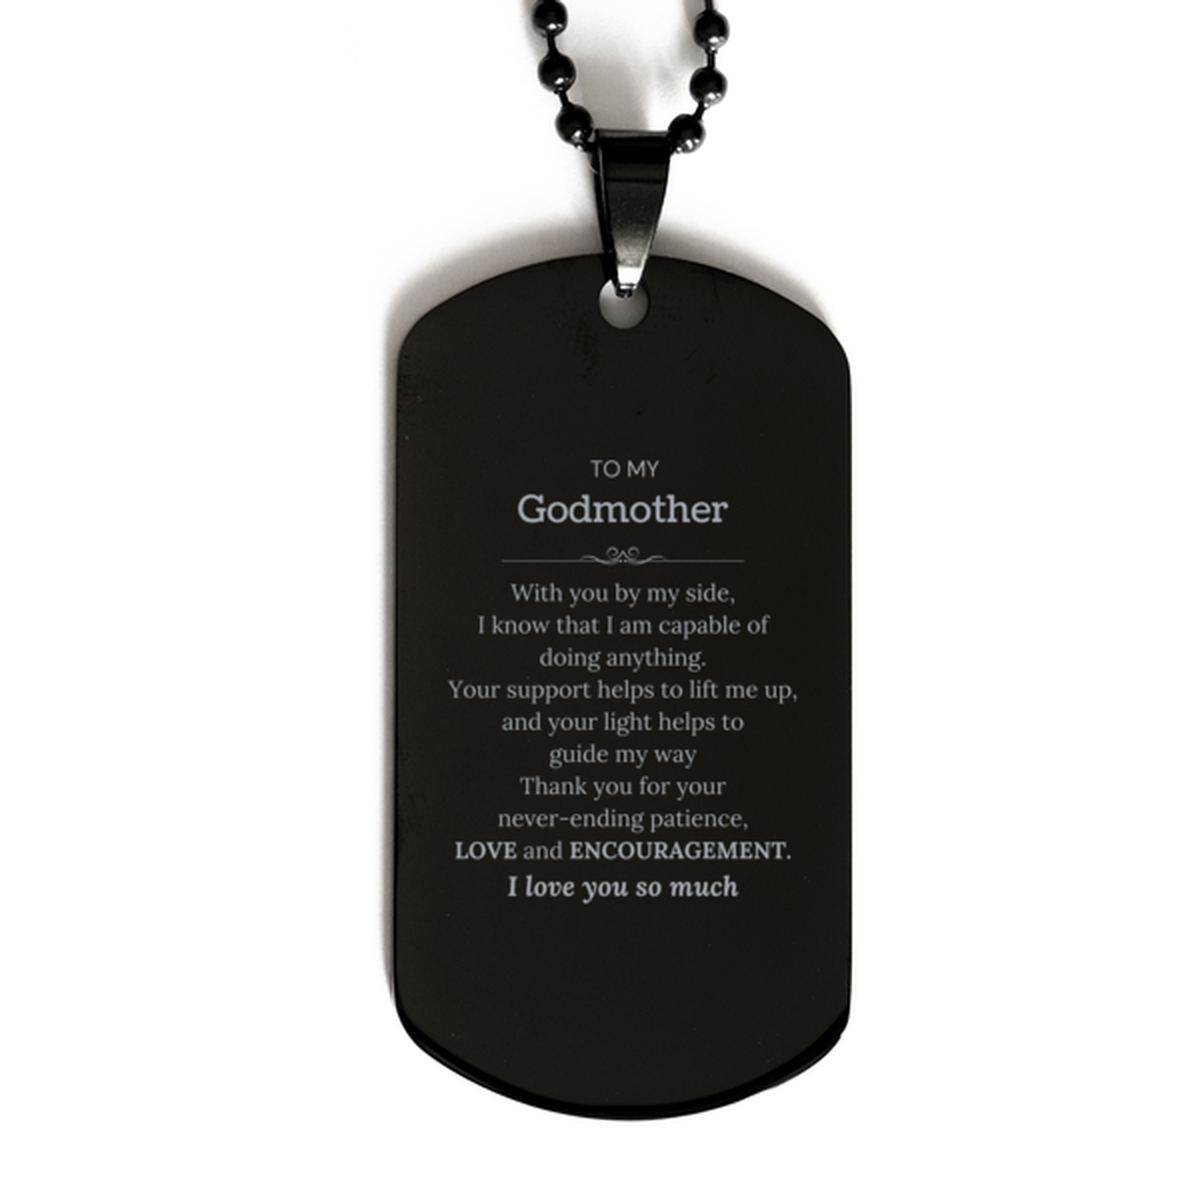 Appreciation Godmother Black Dog Tag Gifts, To My Godmother Birthday Christmas Wedding Keepsake Gifts for Godmother With you by my side, I know that I am capable of doing anything. I love you so much